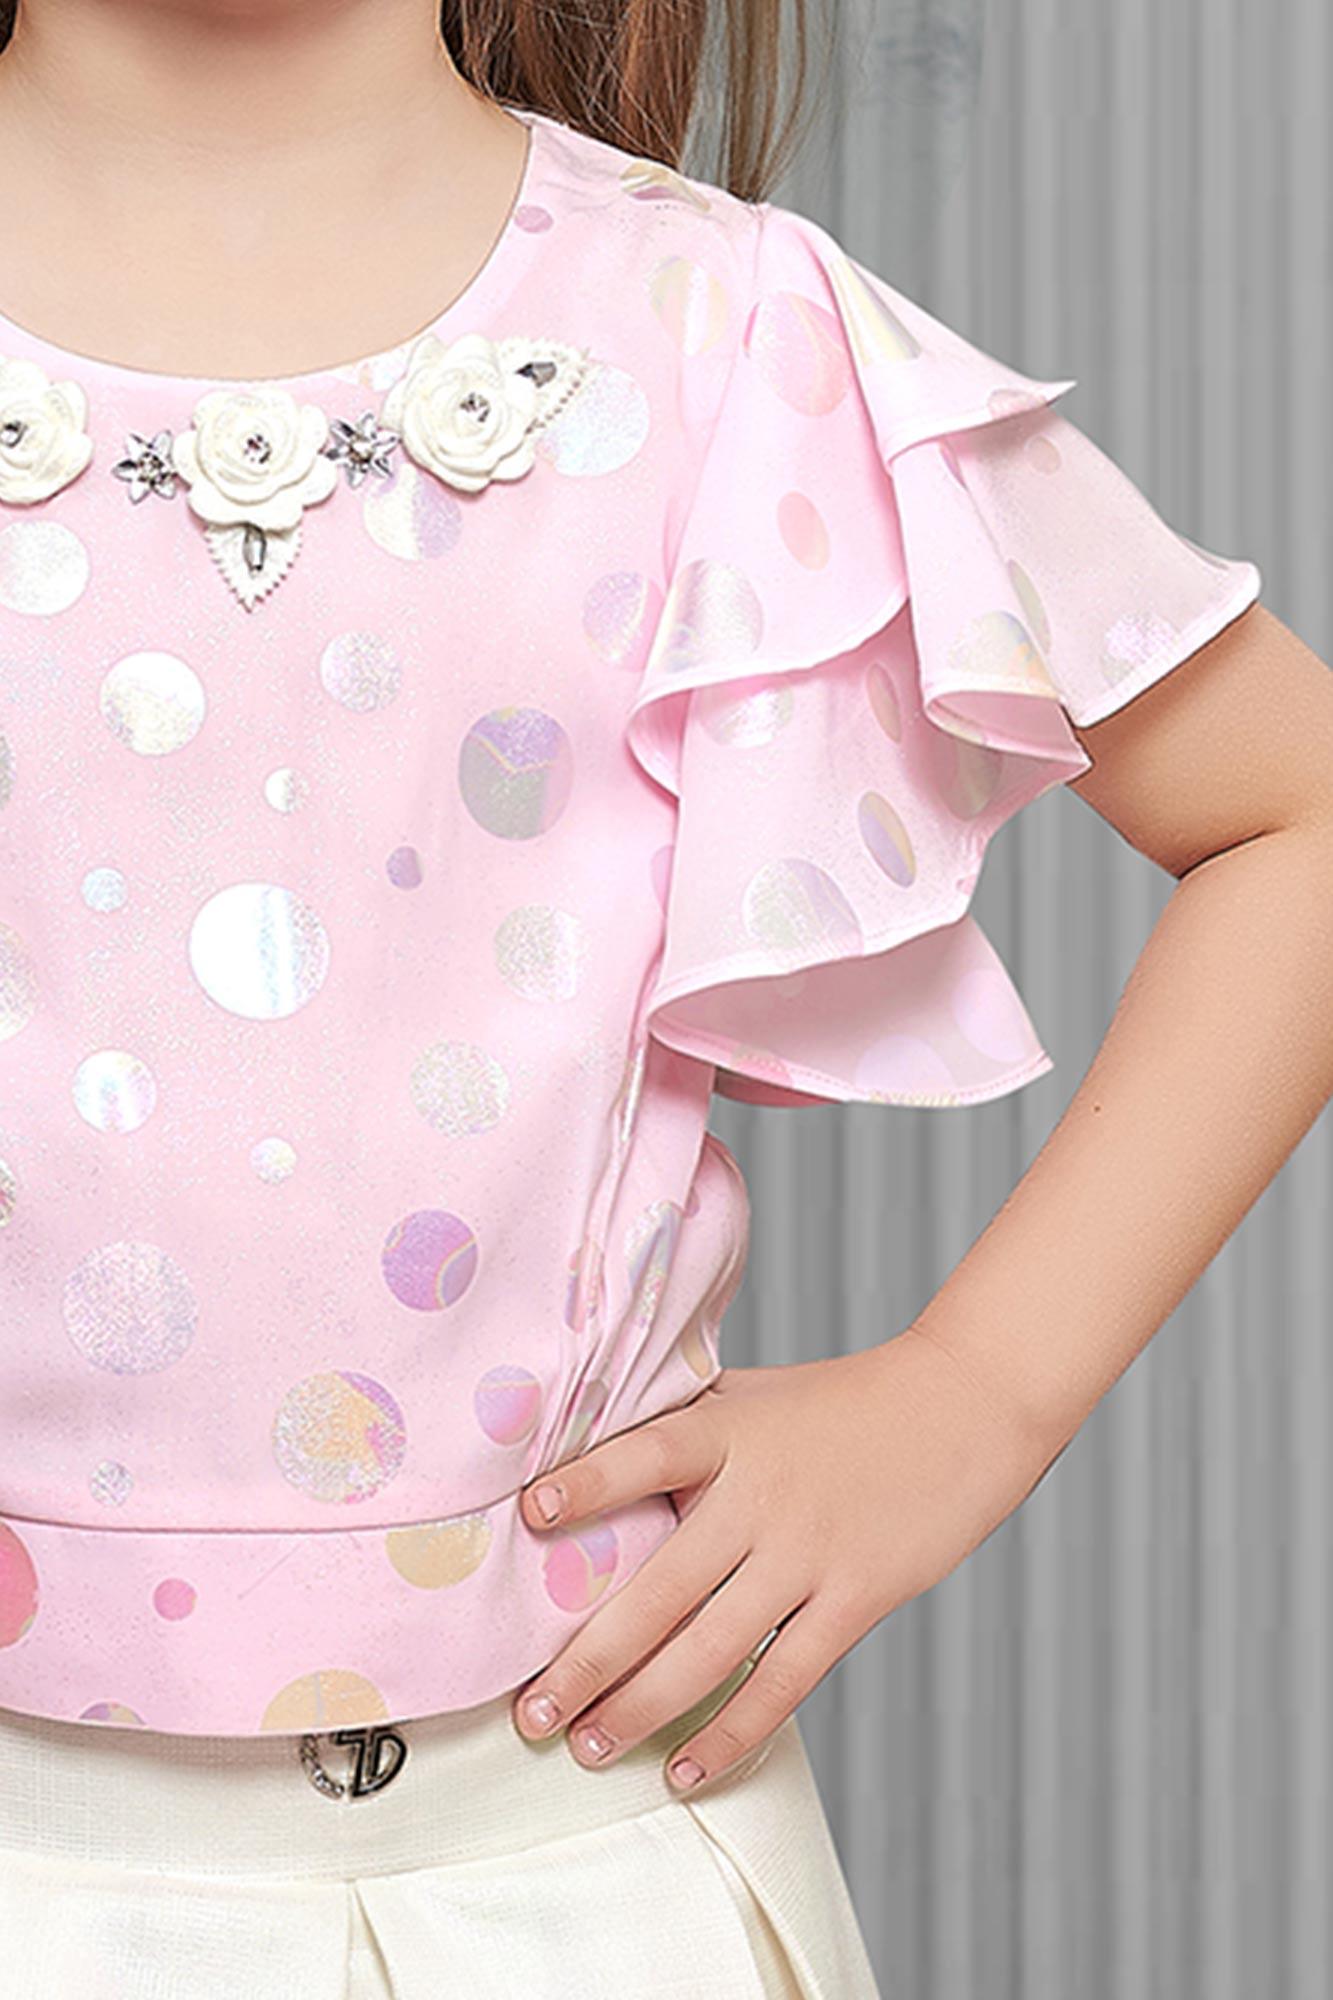 Pretty in Pink: Baby Pink Top and White Pleat Skirt for Little Girls. - Lagorii Kids